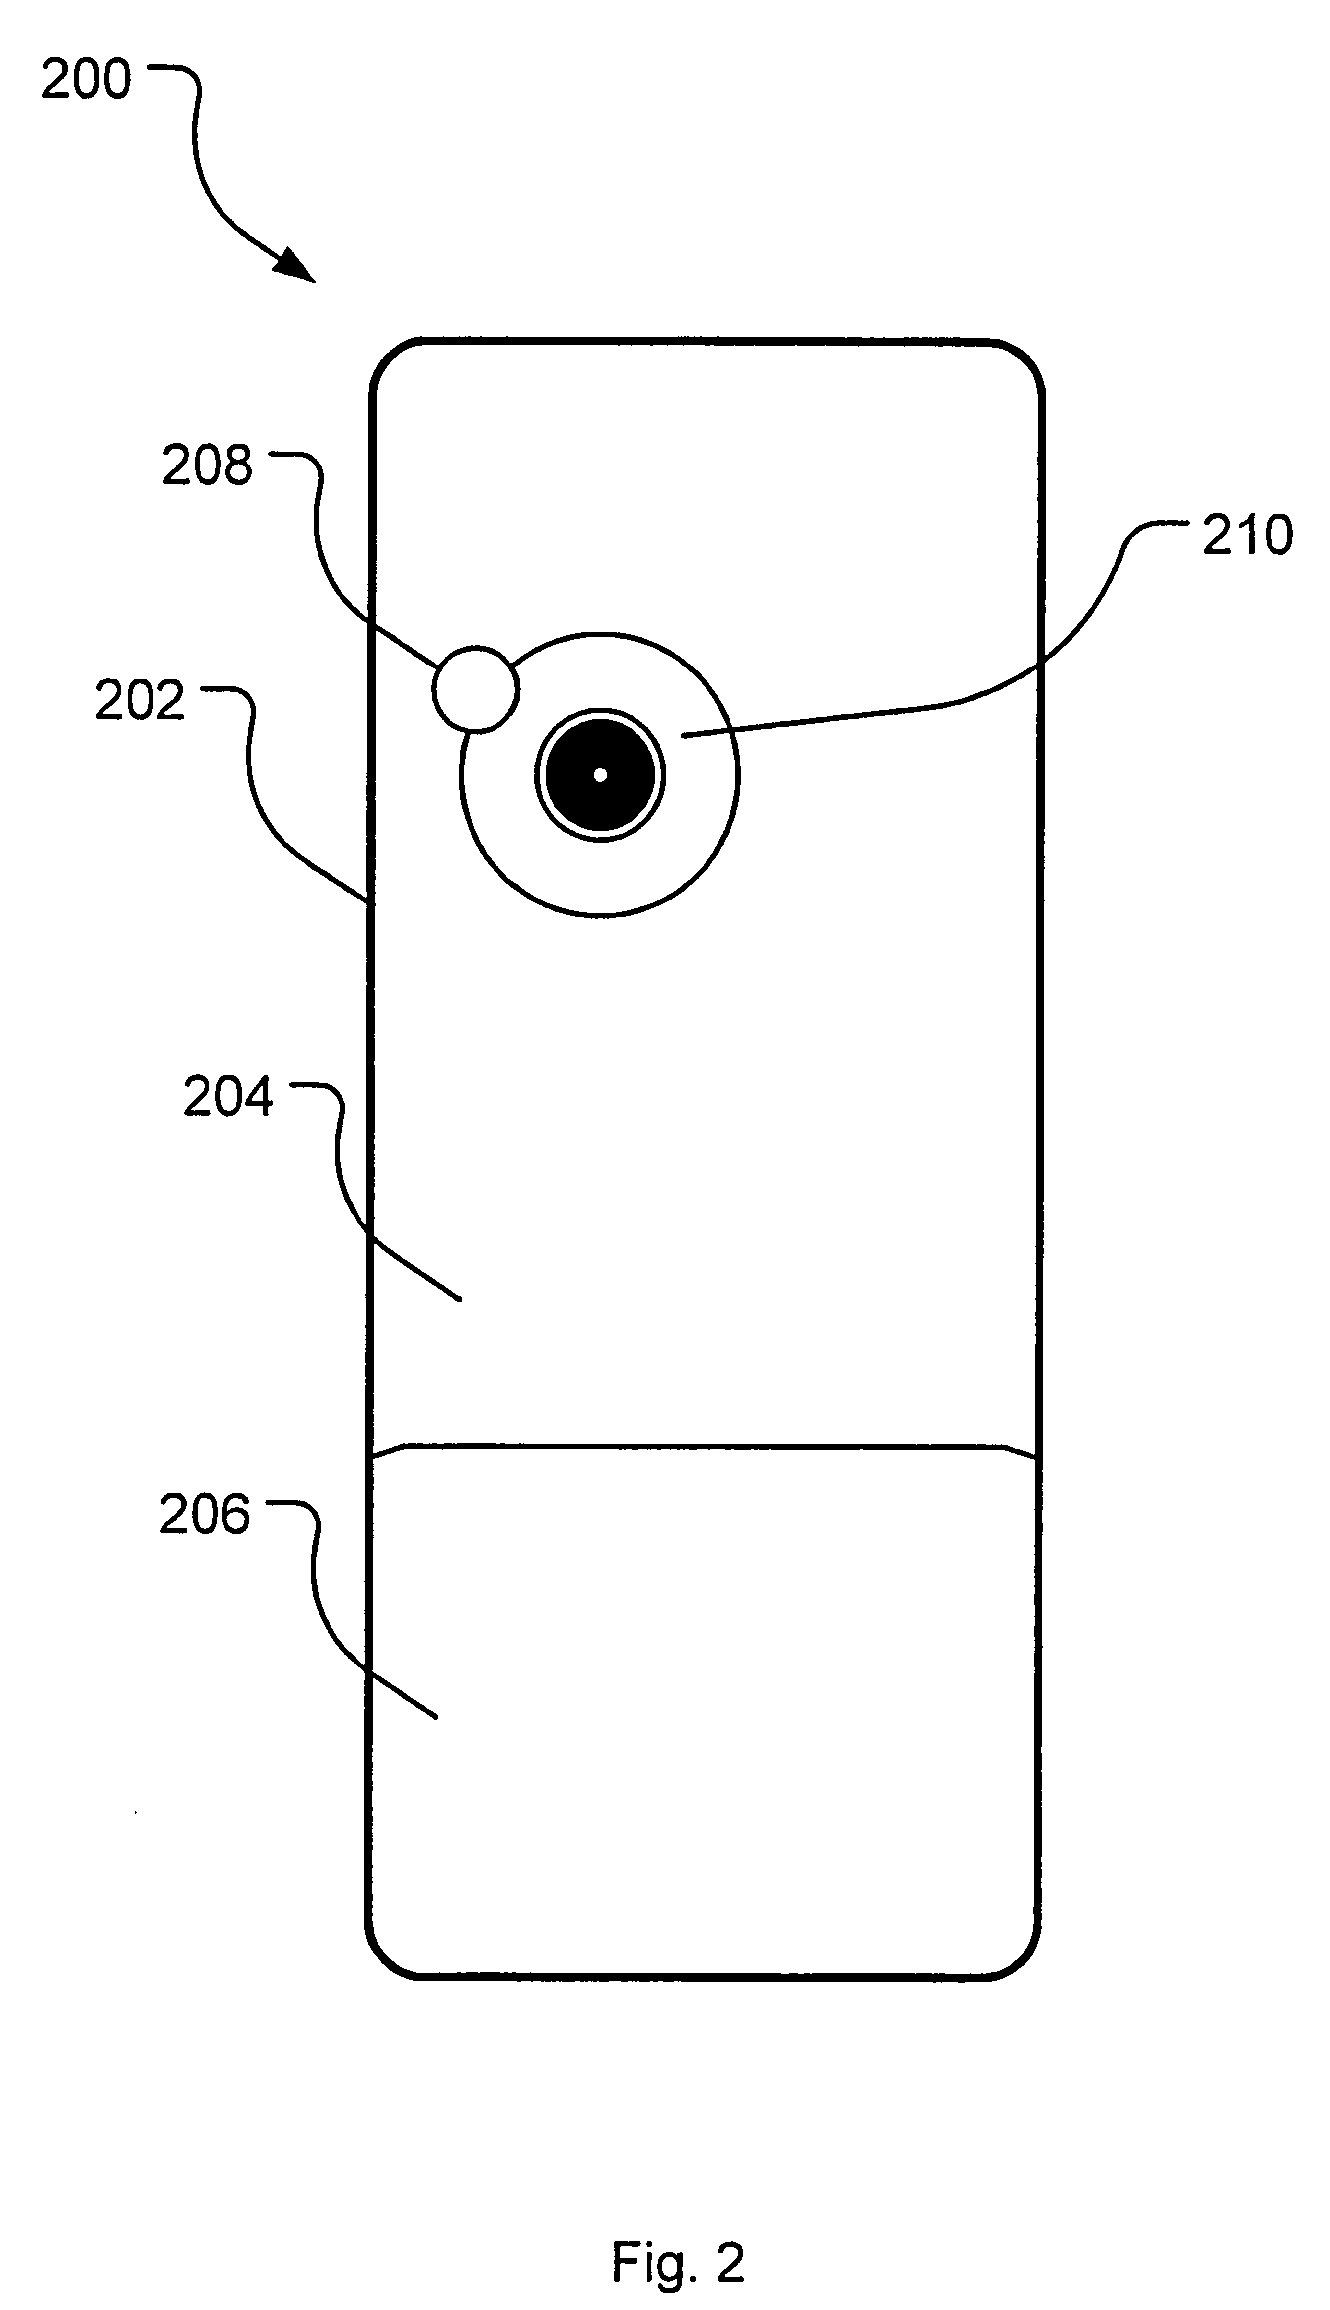 User-modifiable casing for portable communication devices